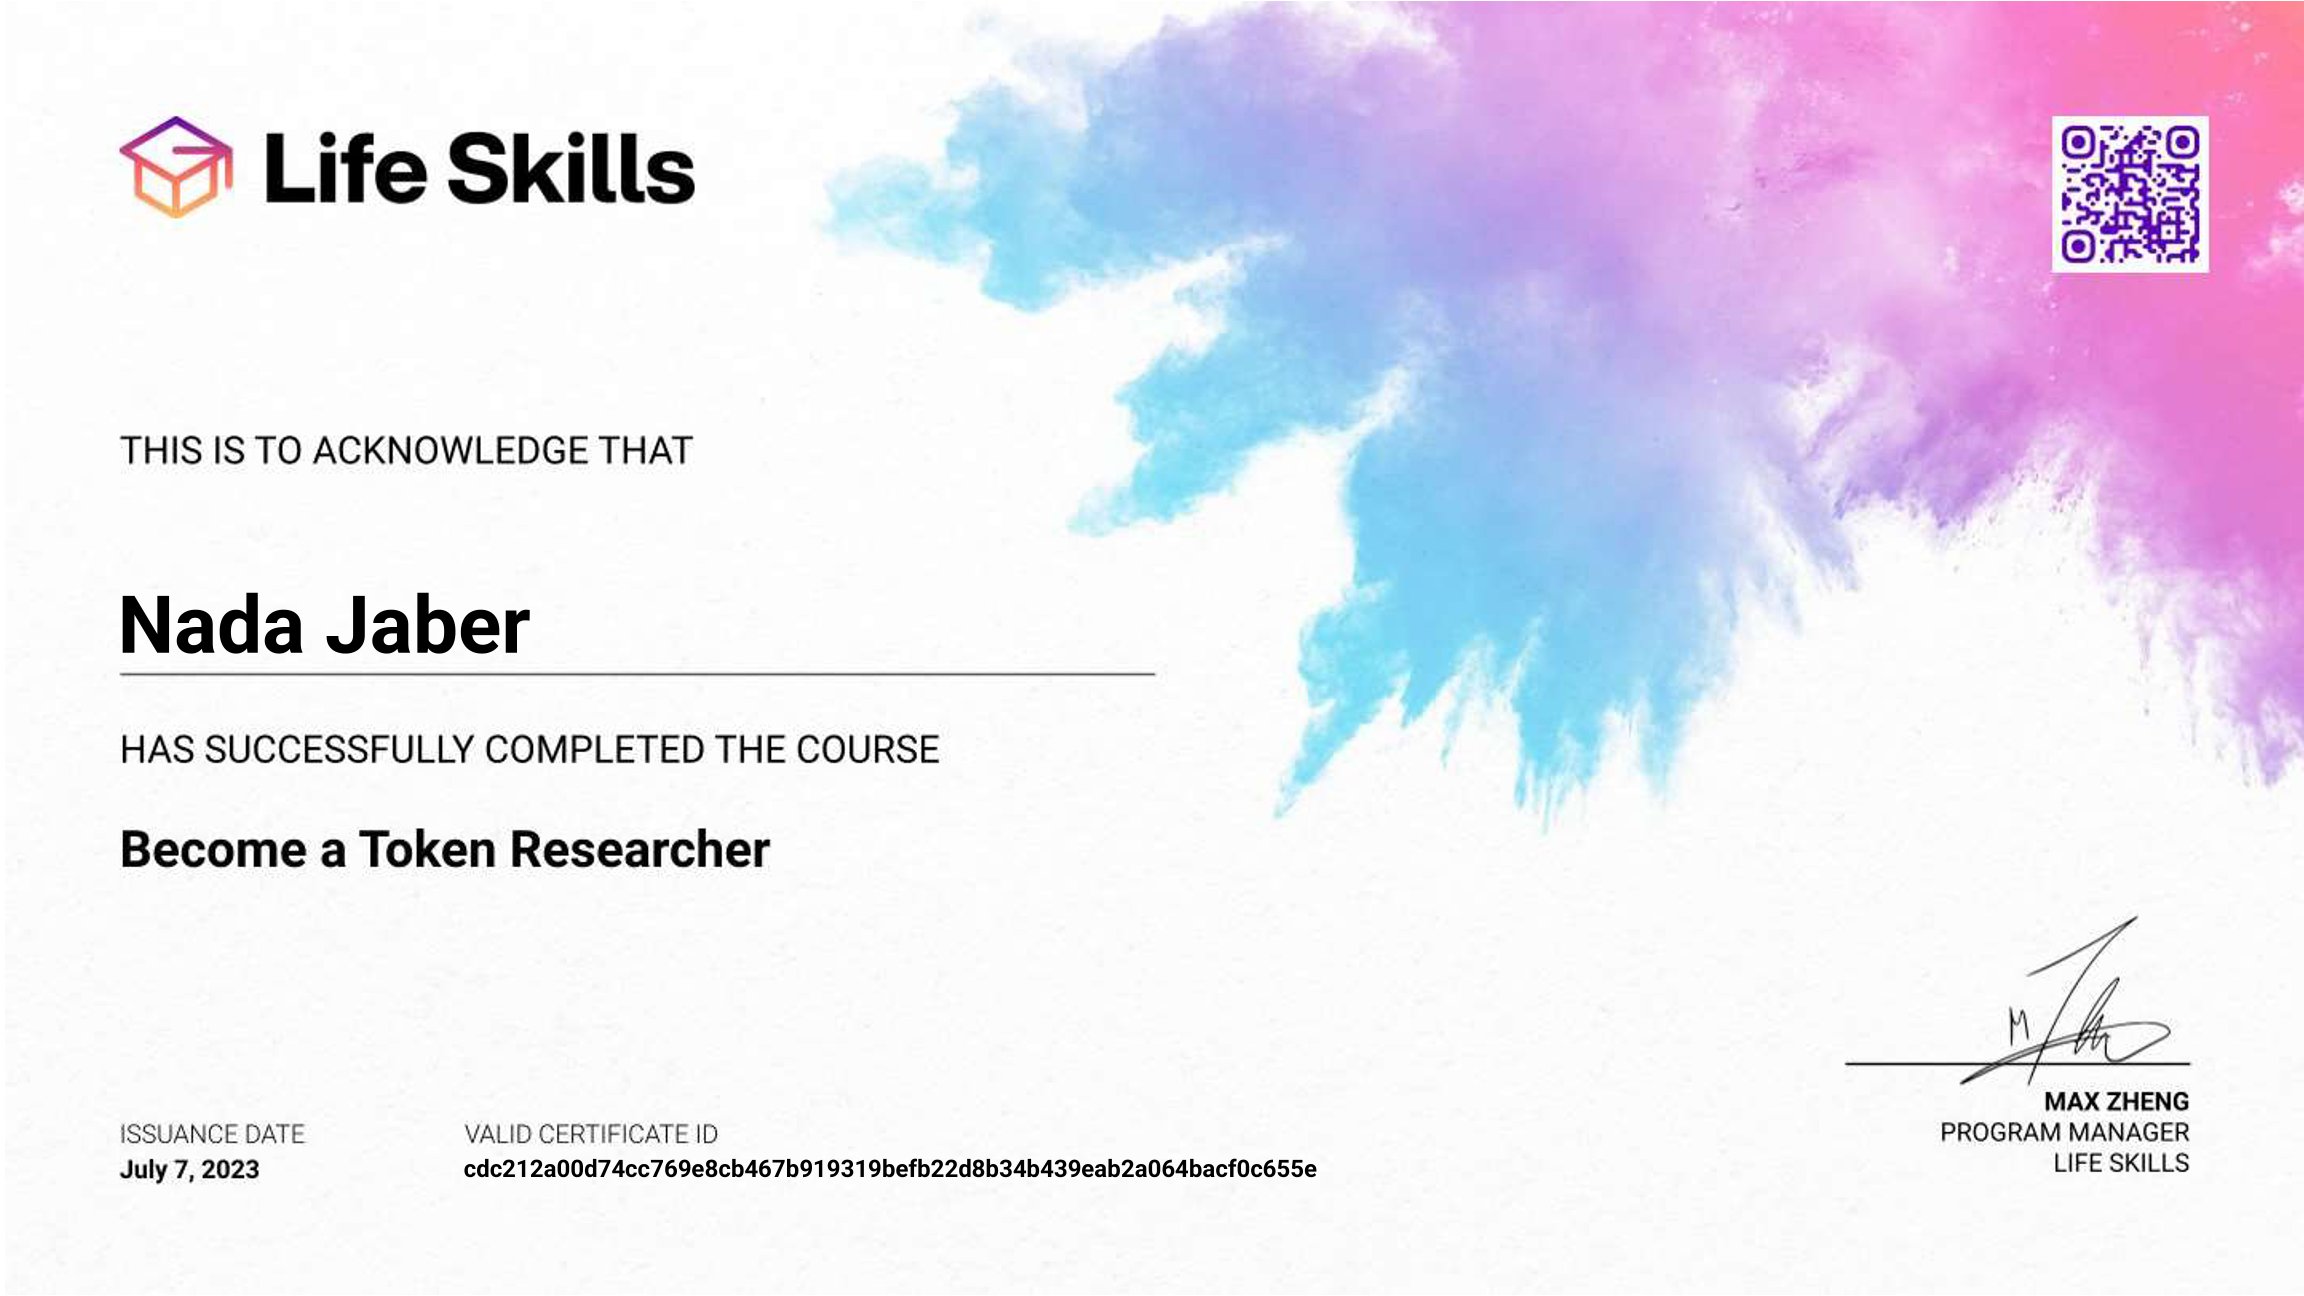 Life Skills - Become a Token Researcher - Nada Jaber - Certificate